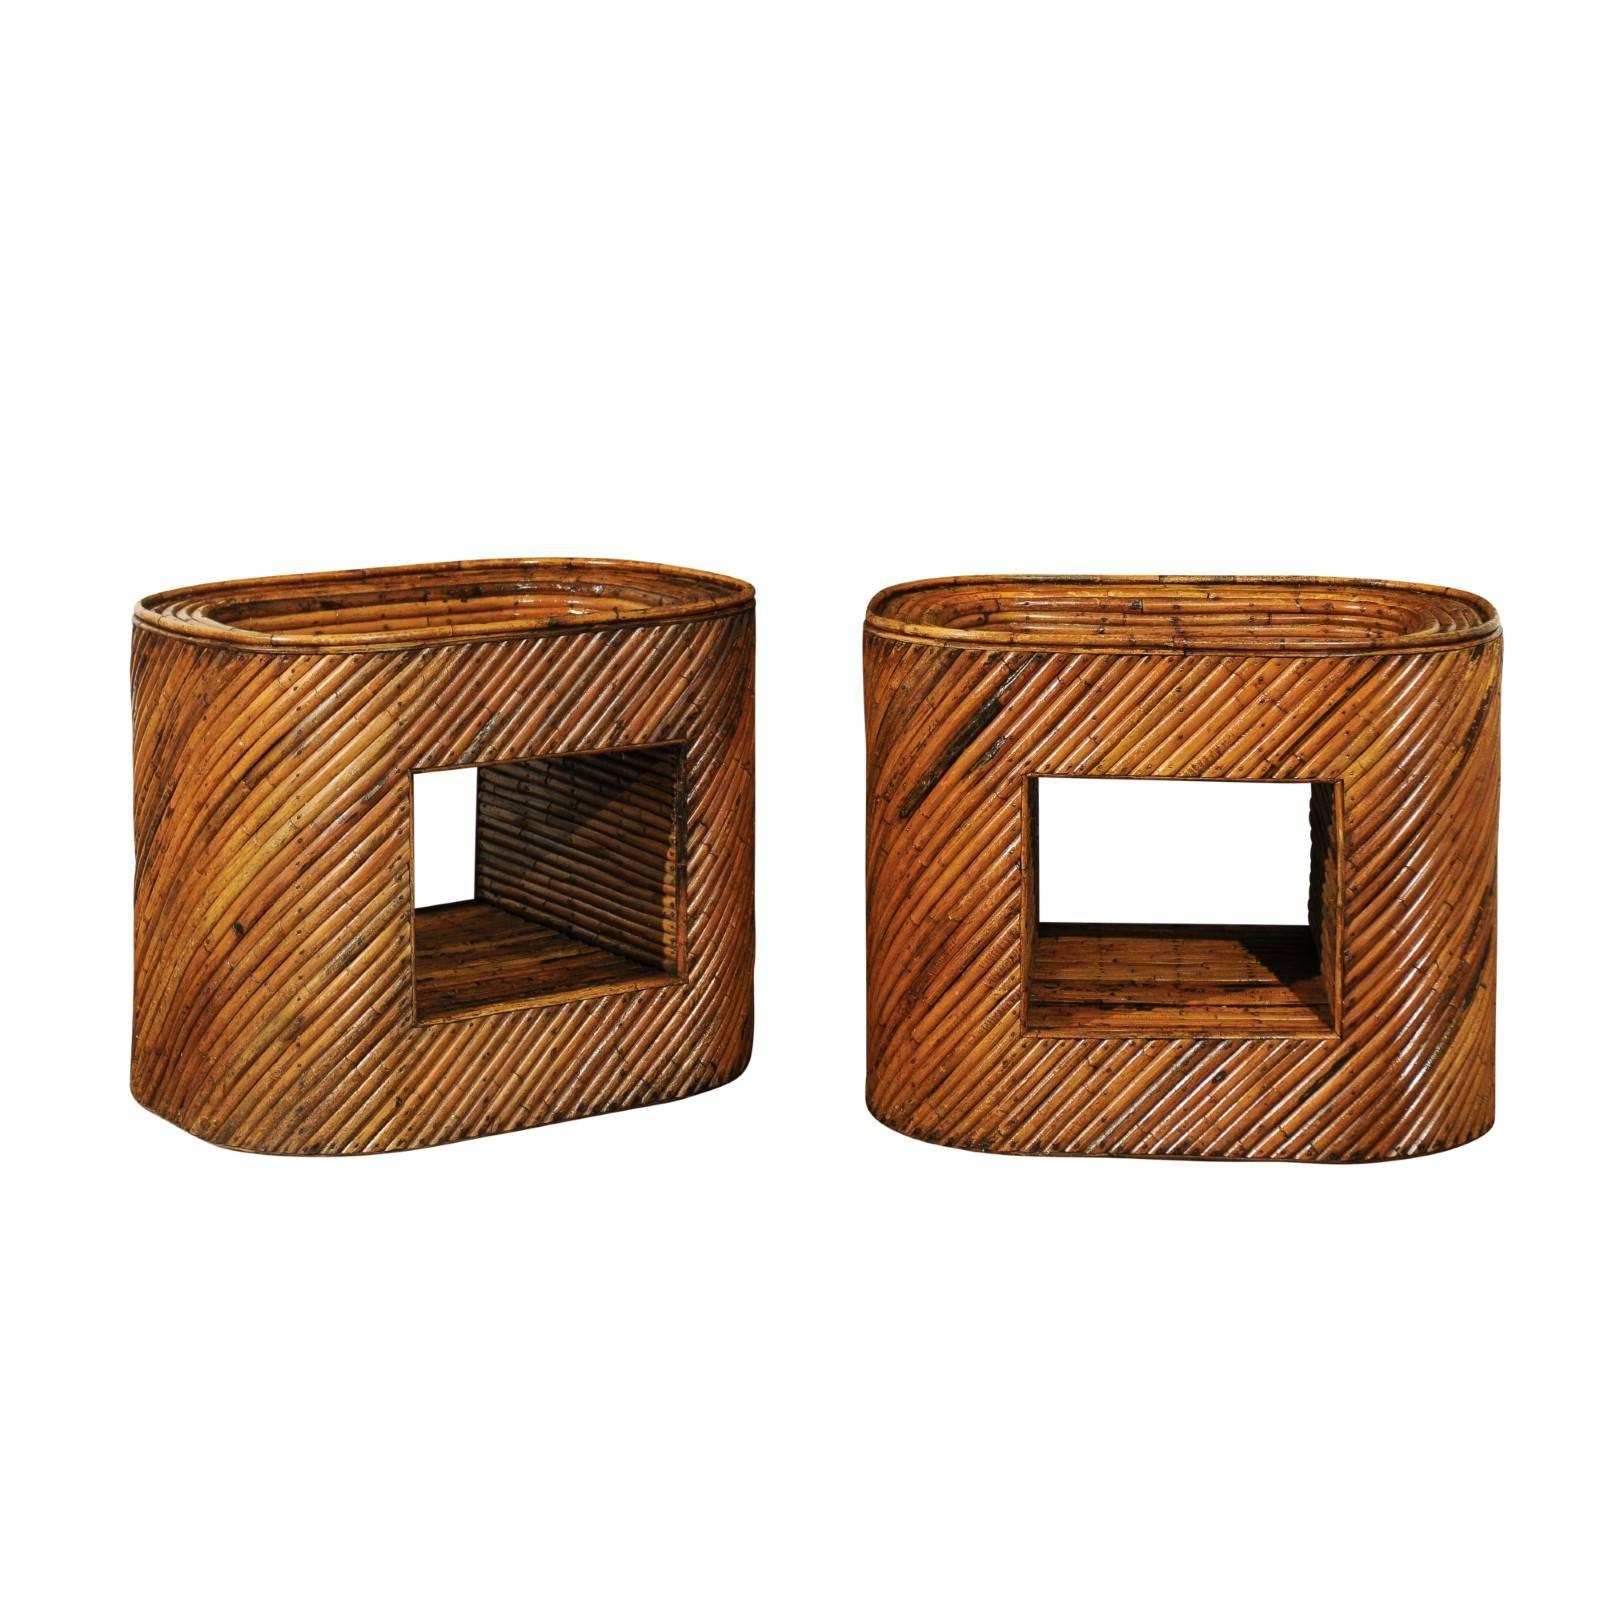 Exceptional Restored Pair of Bamboo Display End Tables, circa 1975